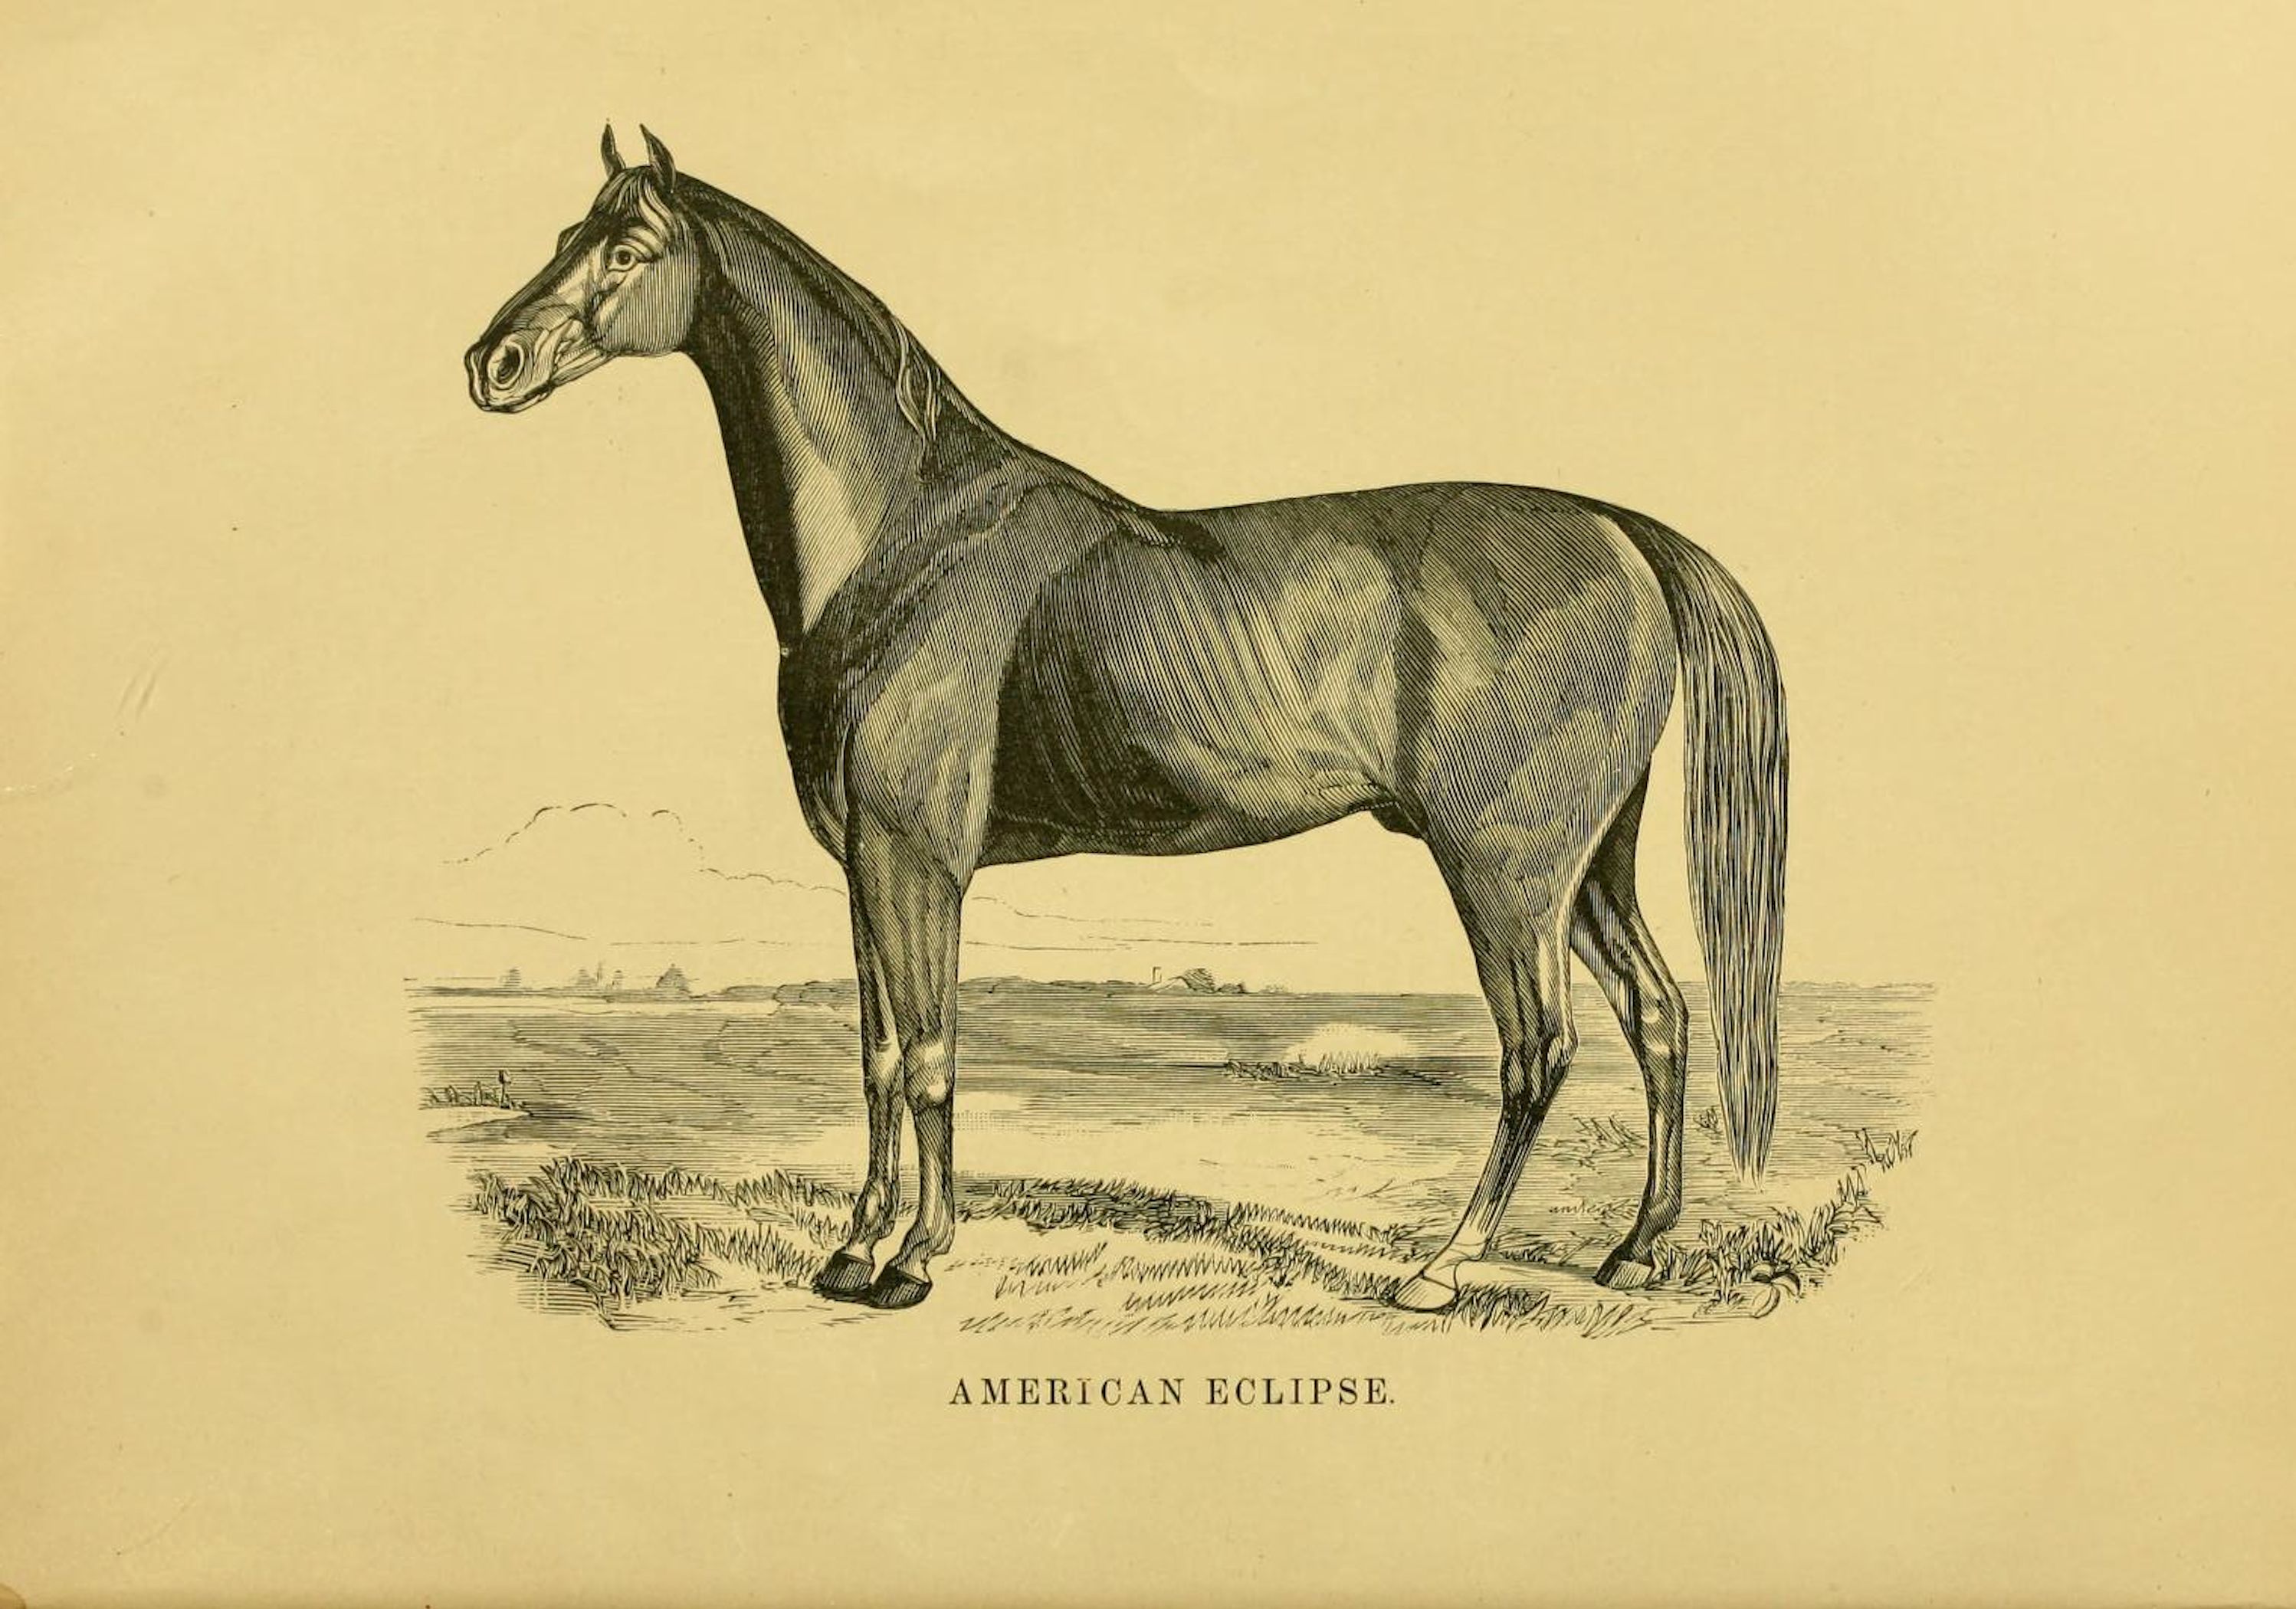 Illustration of American Eclipse from "Famous American Racehorses," 1877 (Museum Collection)